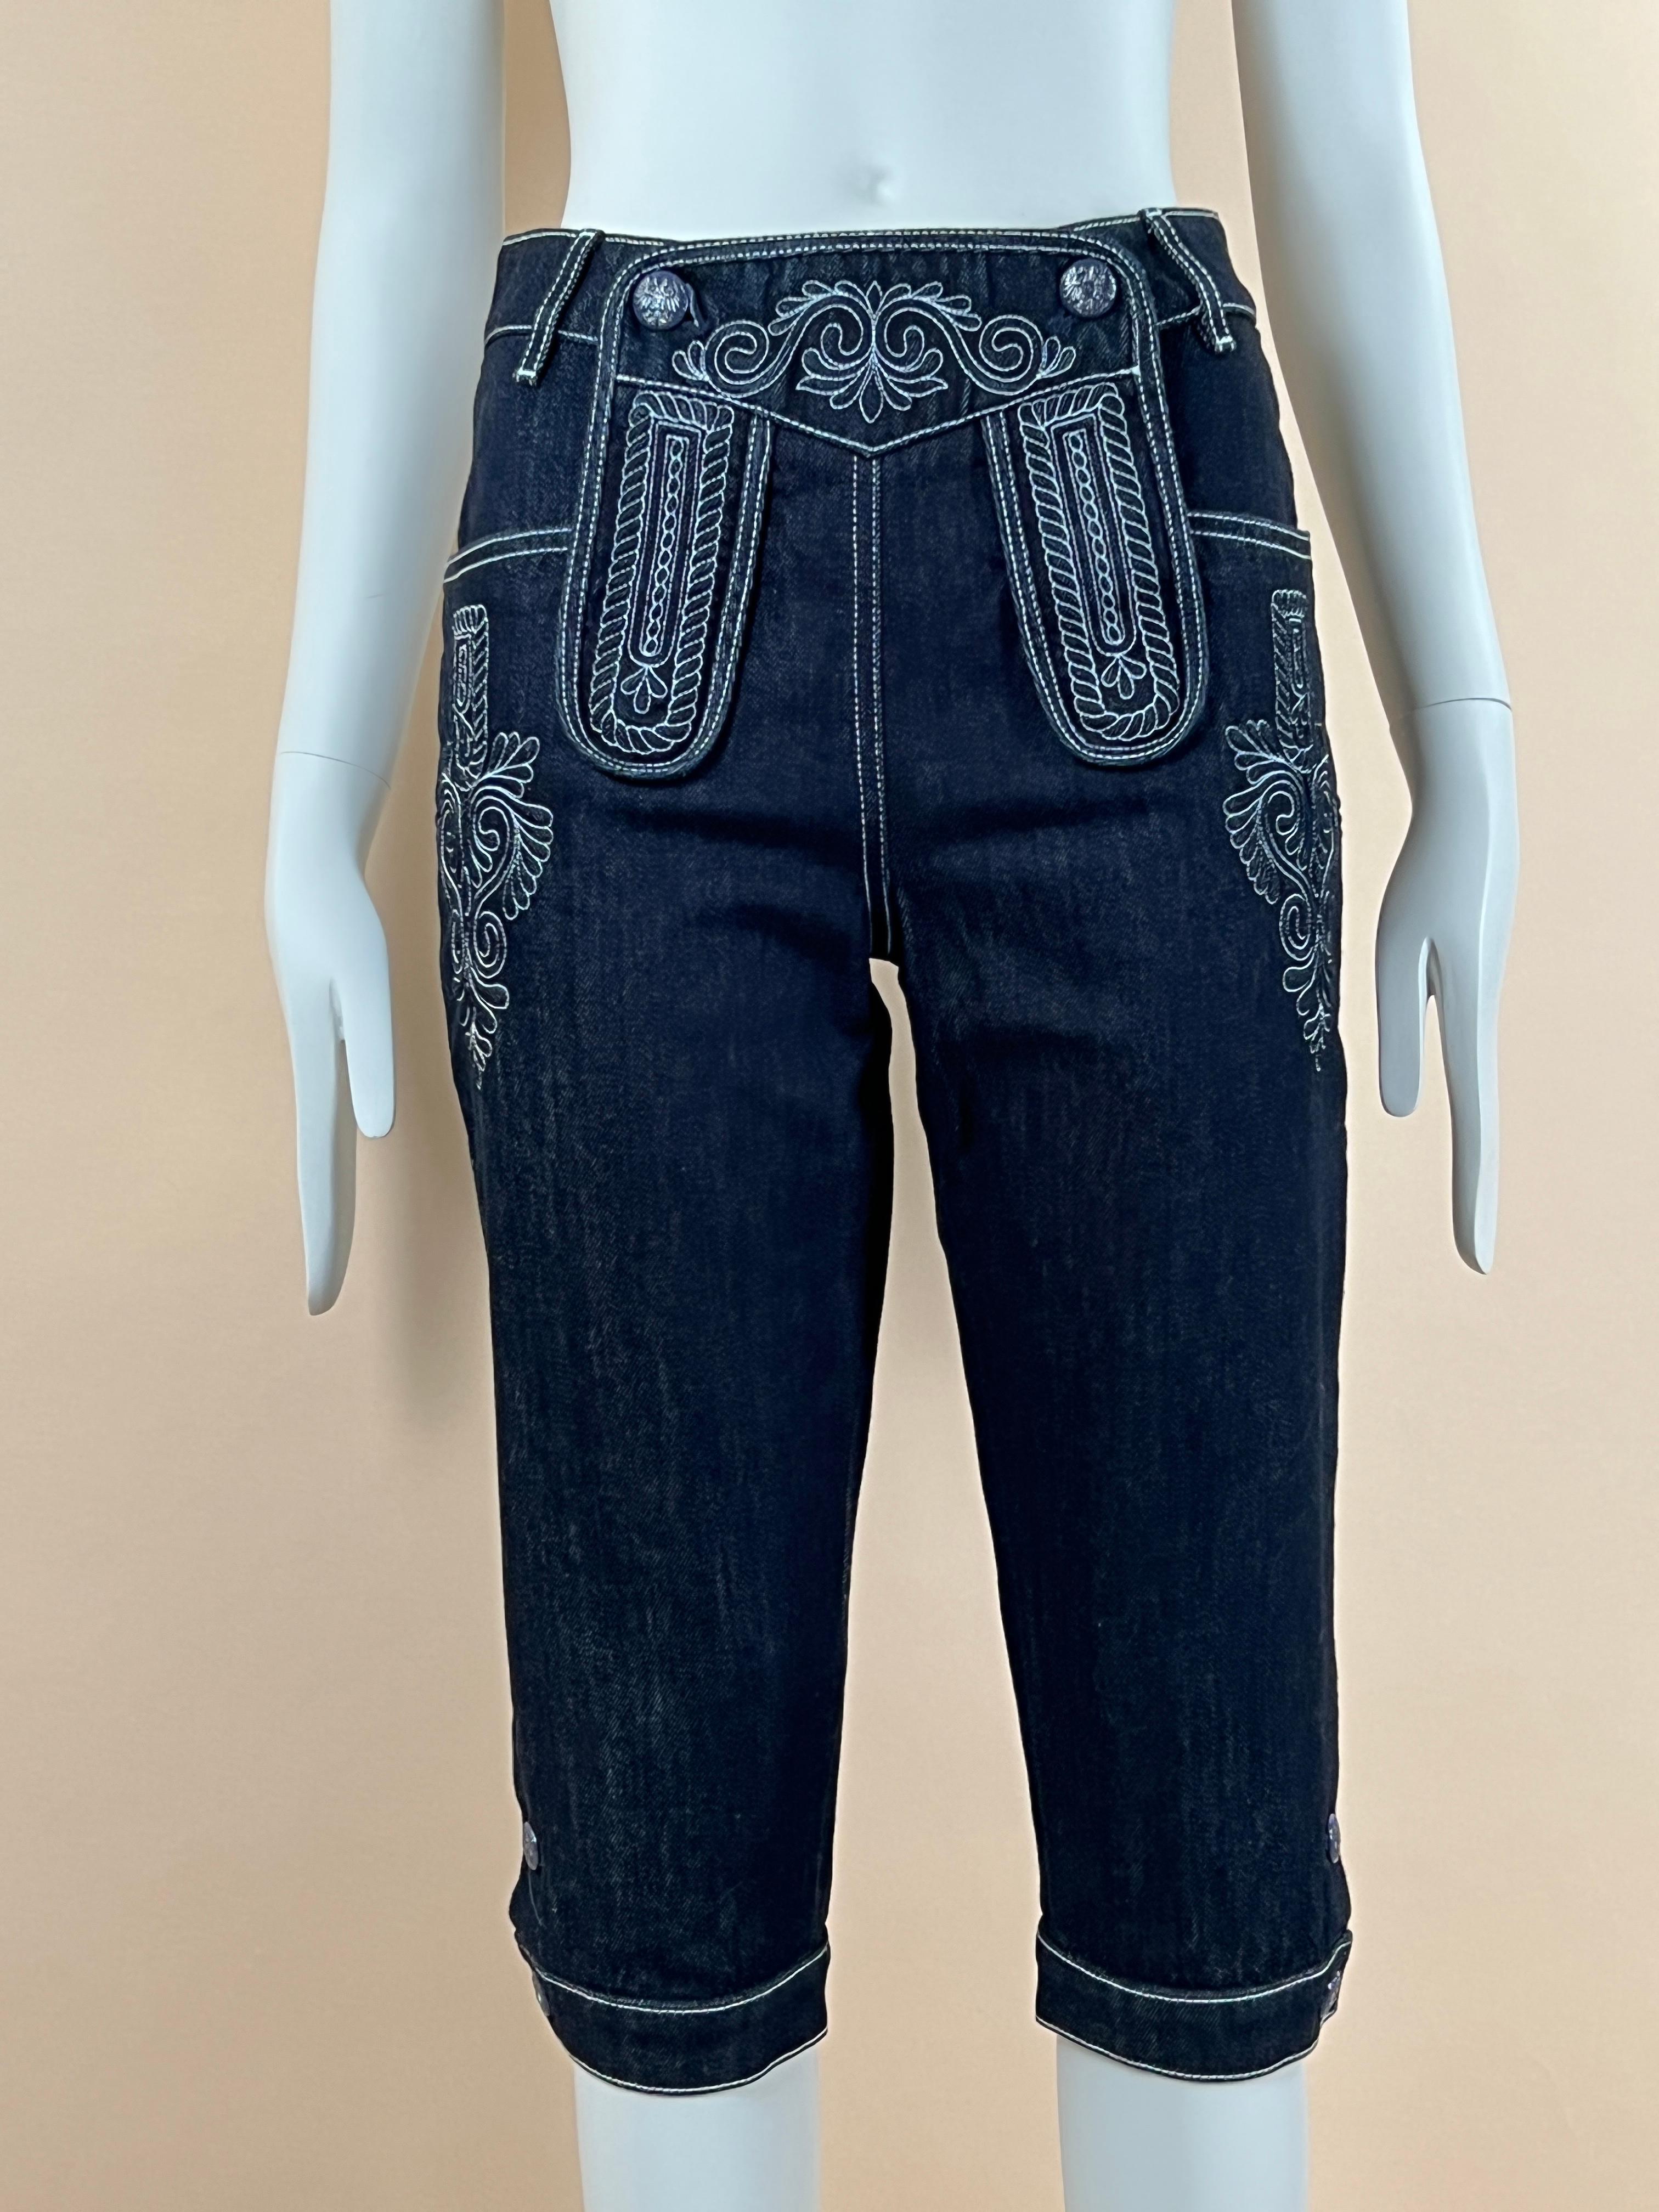 Women's Chanel Salzburg Collection Jeans For Sale